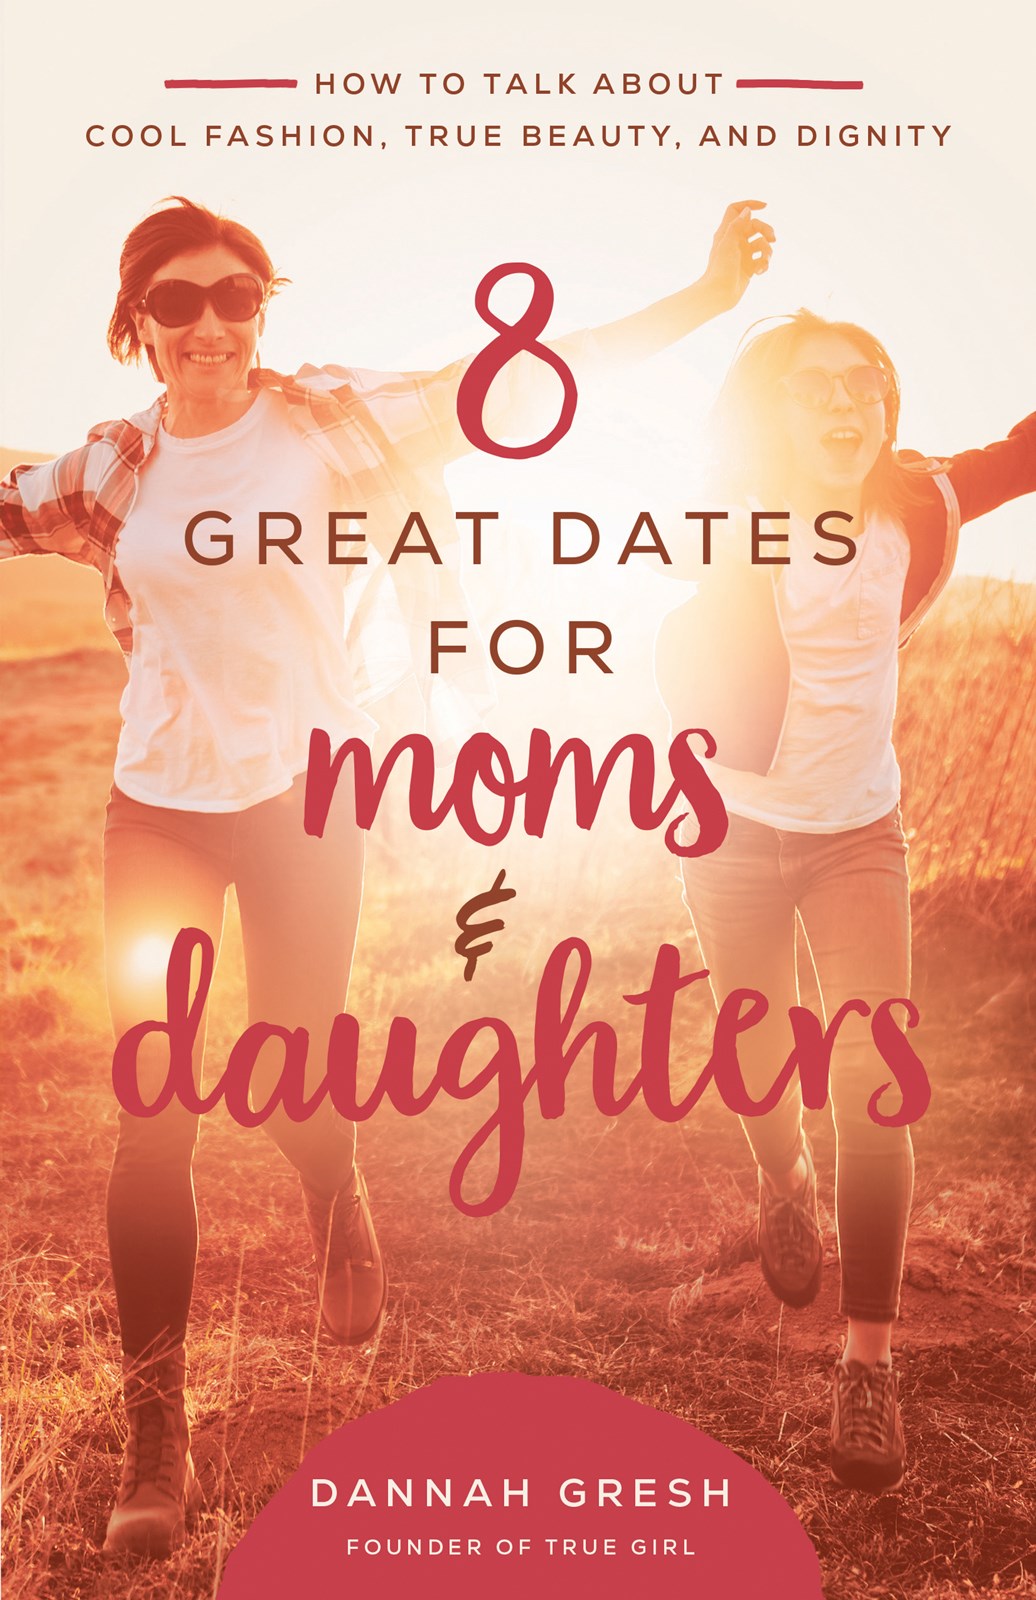 8 Great Dates For Moms & Daughters